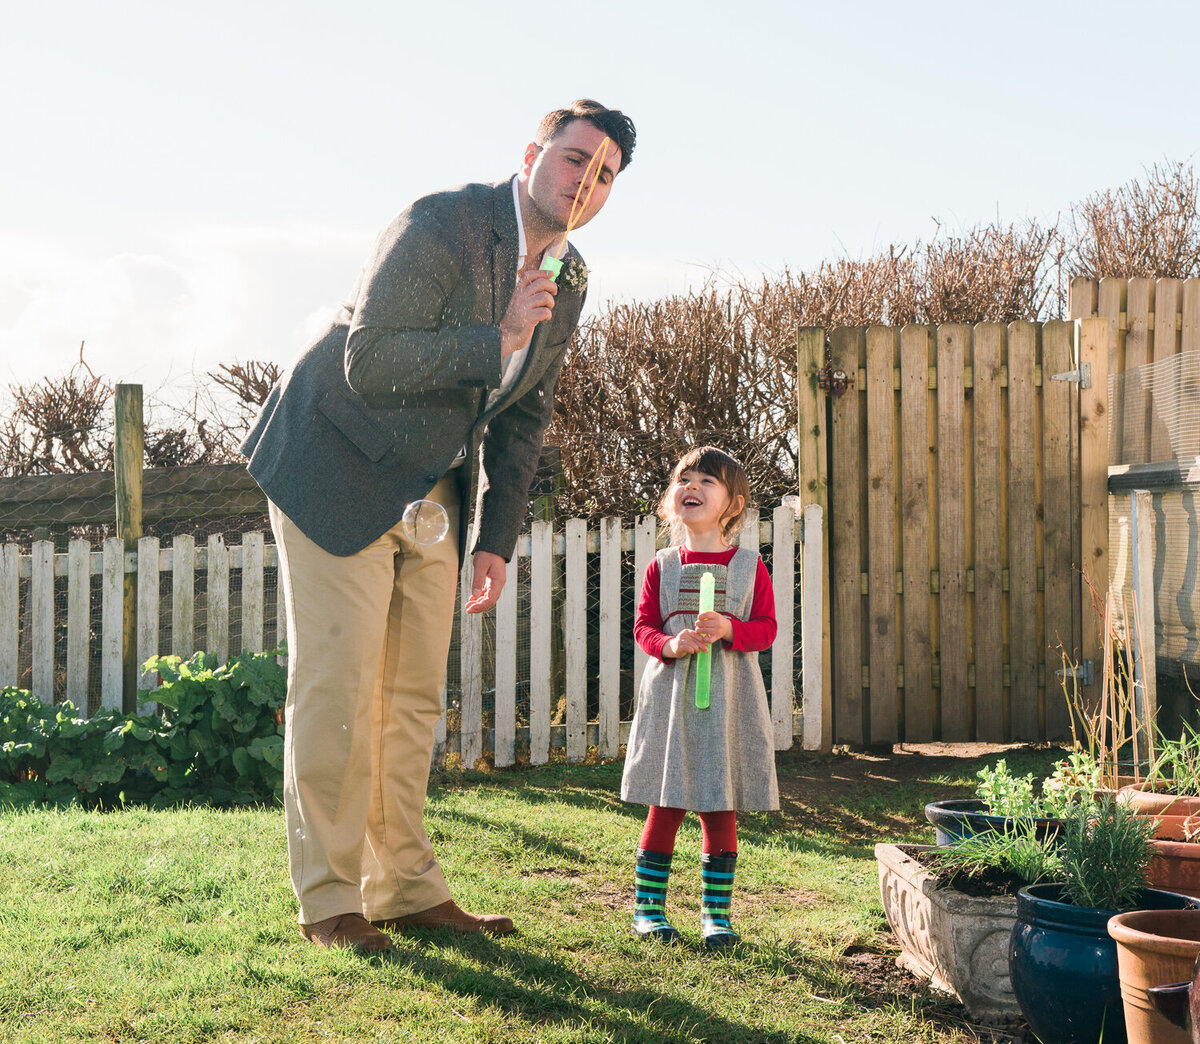 Groom blowing bubbles with child in garden